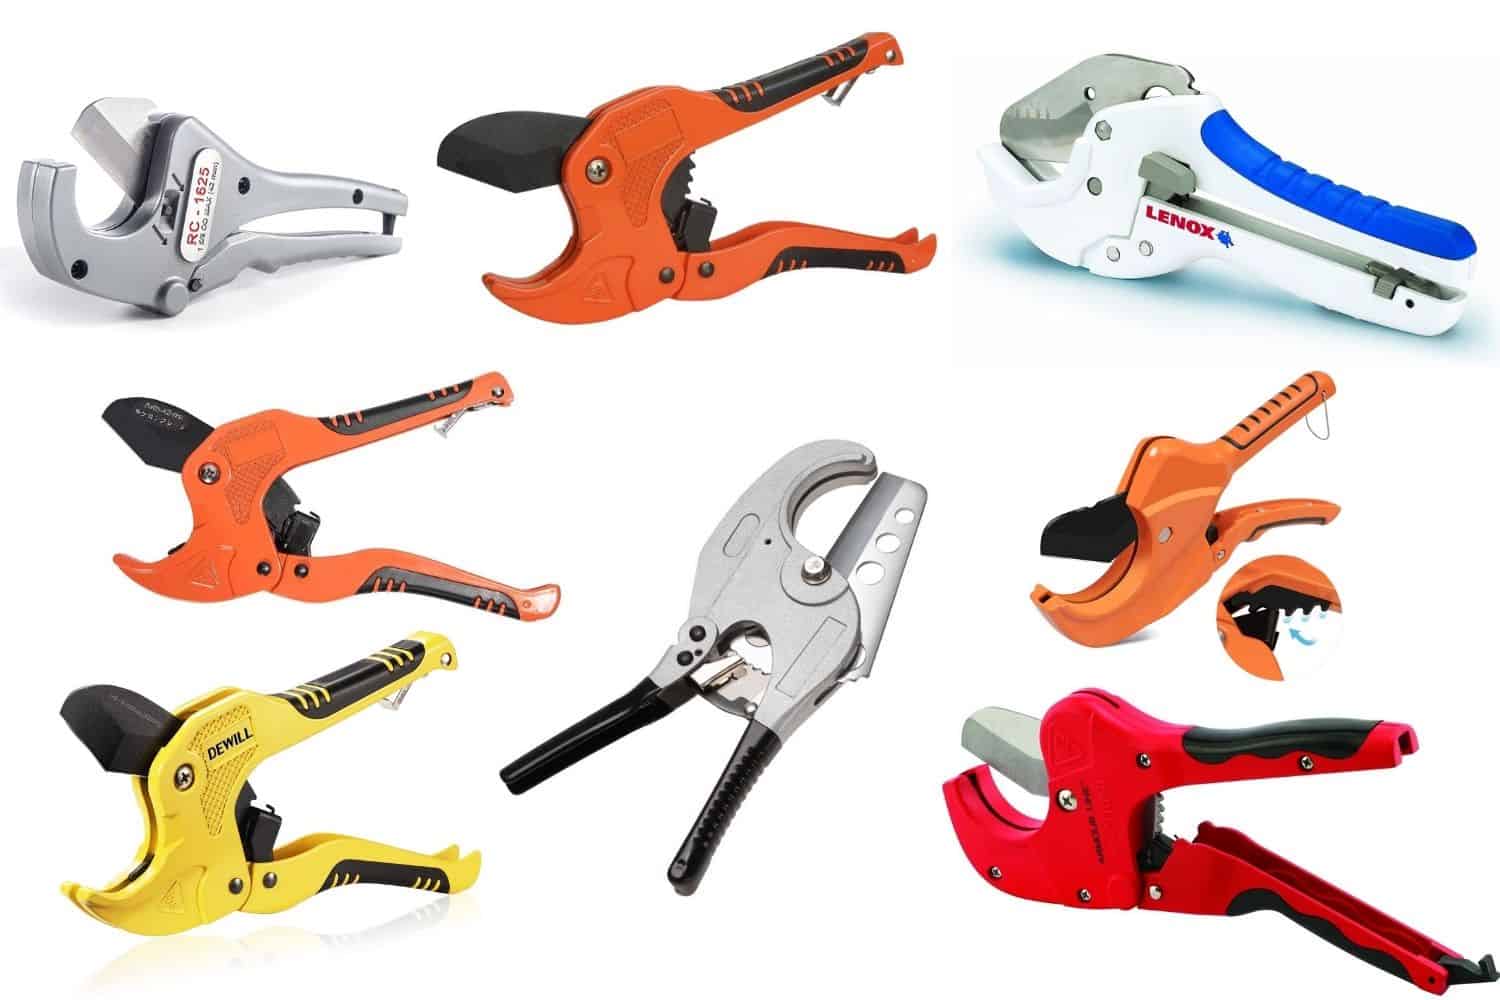 PVC Pipe Cutter Review